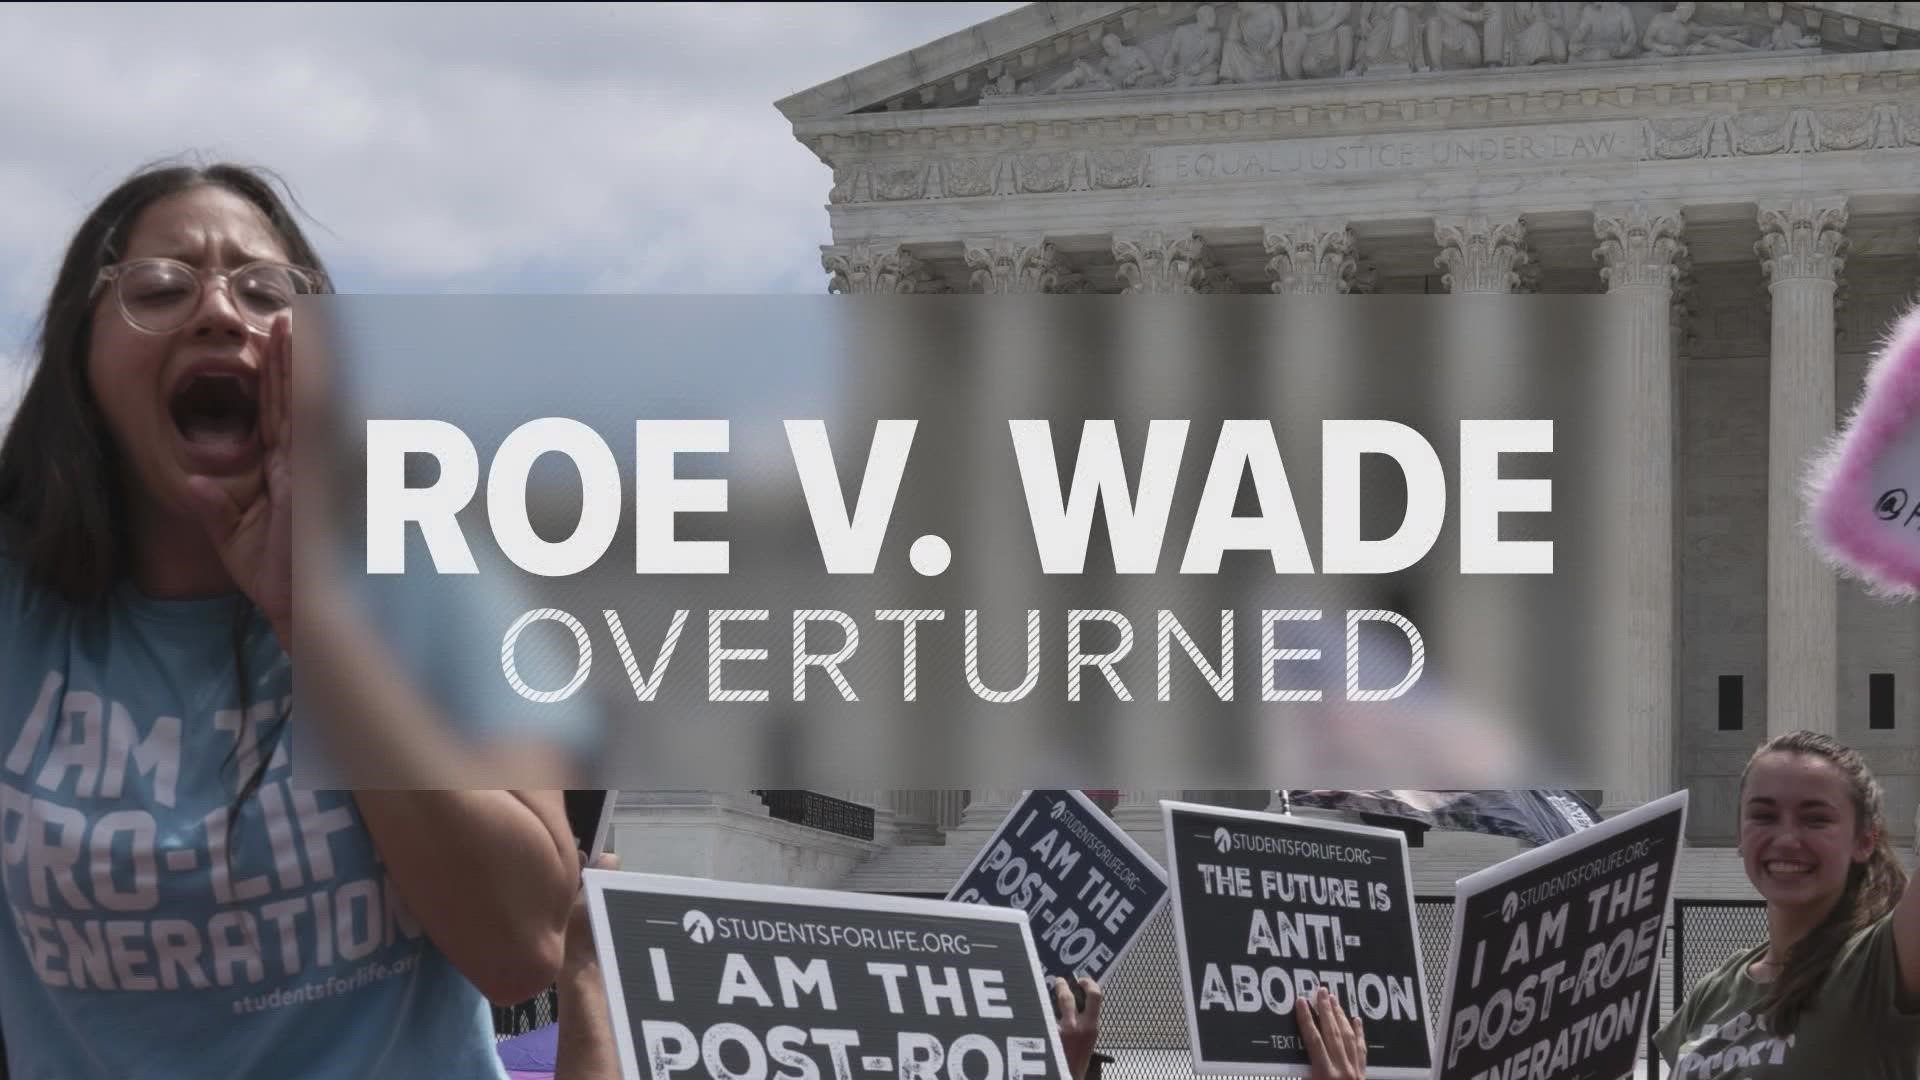 The overturning of Roe v. Wade will affect more than just patients who seek abortions.